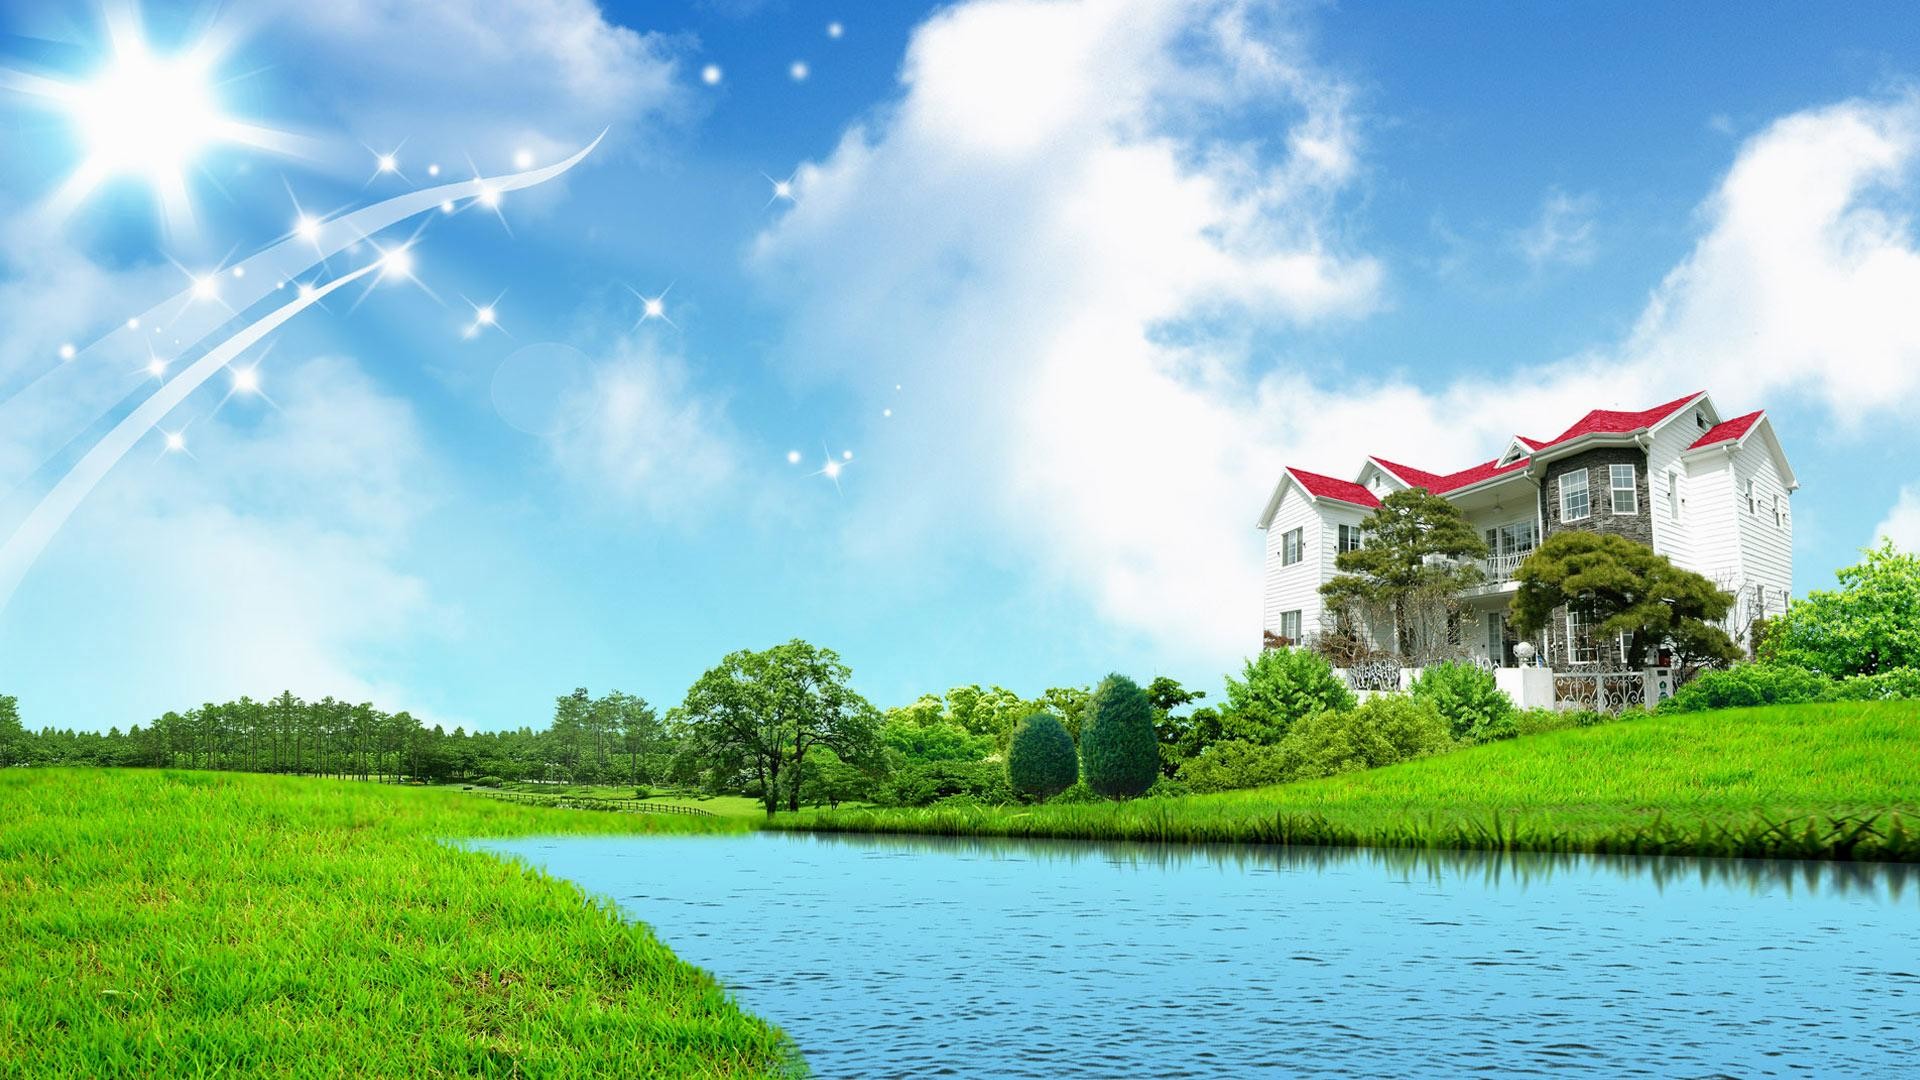 1920x1080 wallpaper.wiki-Sweet-home-fantasy-green-nature-wallpapers-